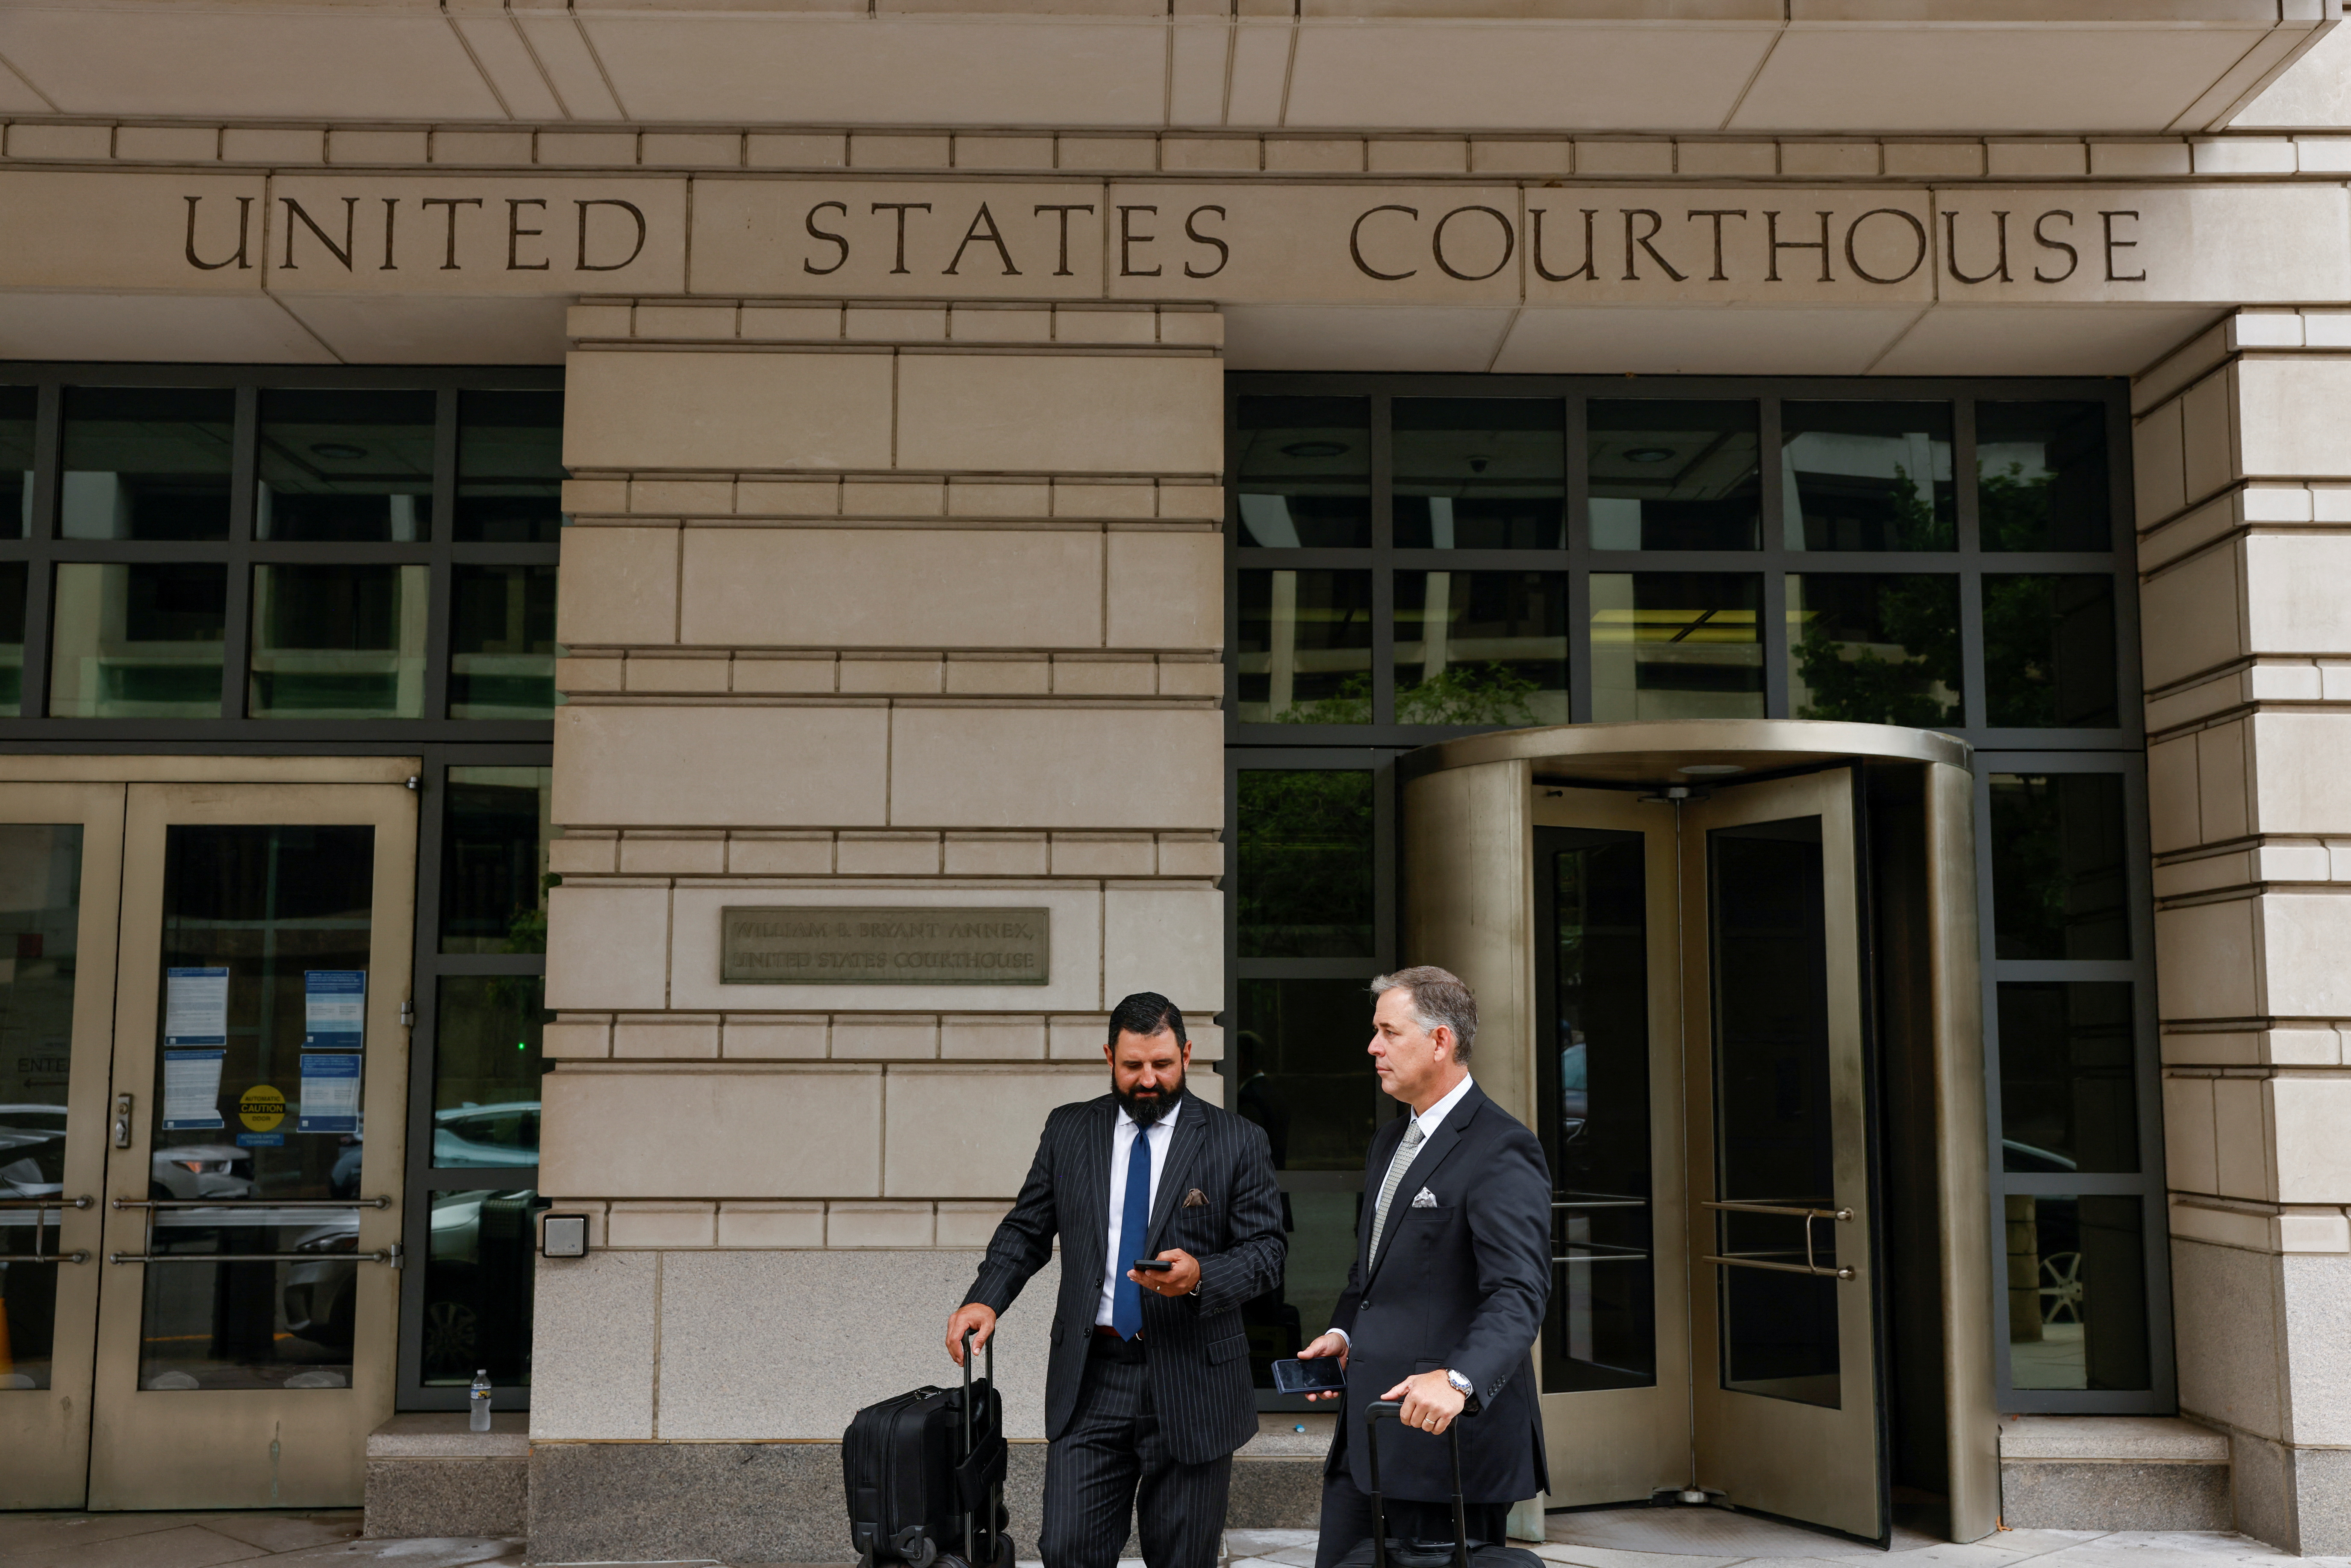 Nayib Hassan, the lawyer of Former Proud Boys chairman Enrique Tarrio, stands outside of the U.S. Federal Courthouse after the sentencing was postponed due to an emergency, in Washington D.C